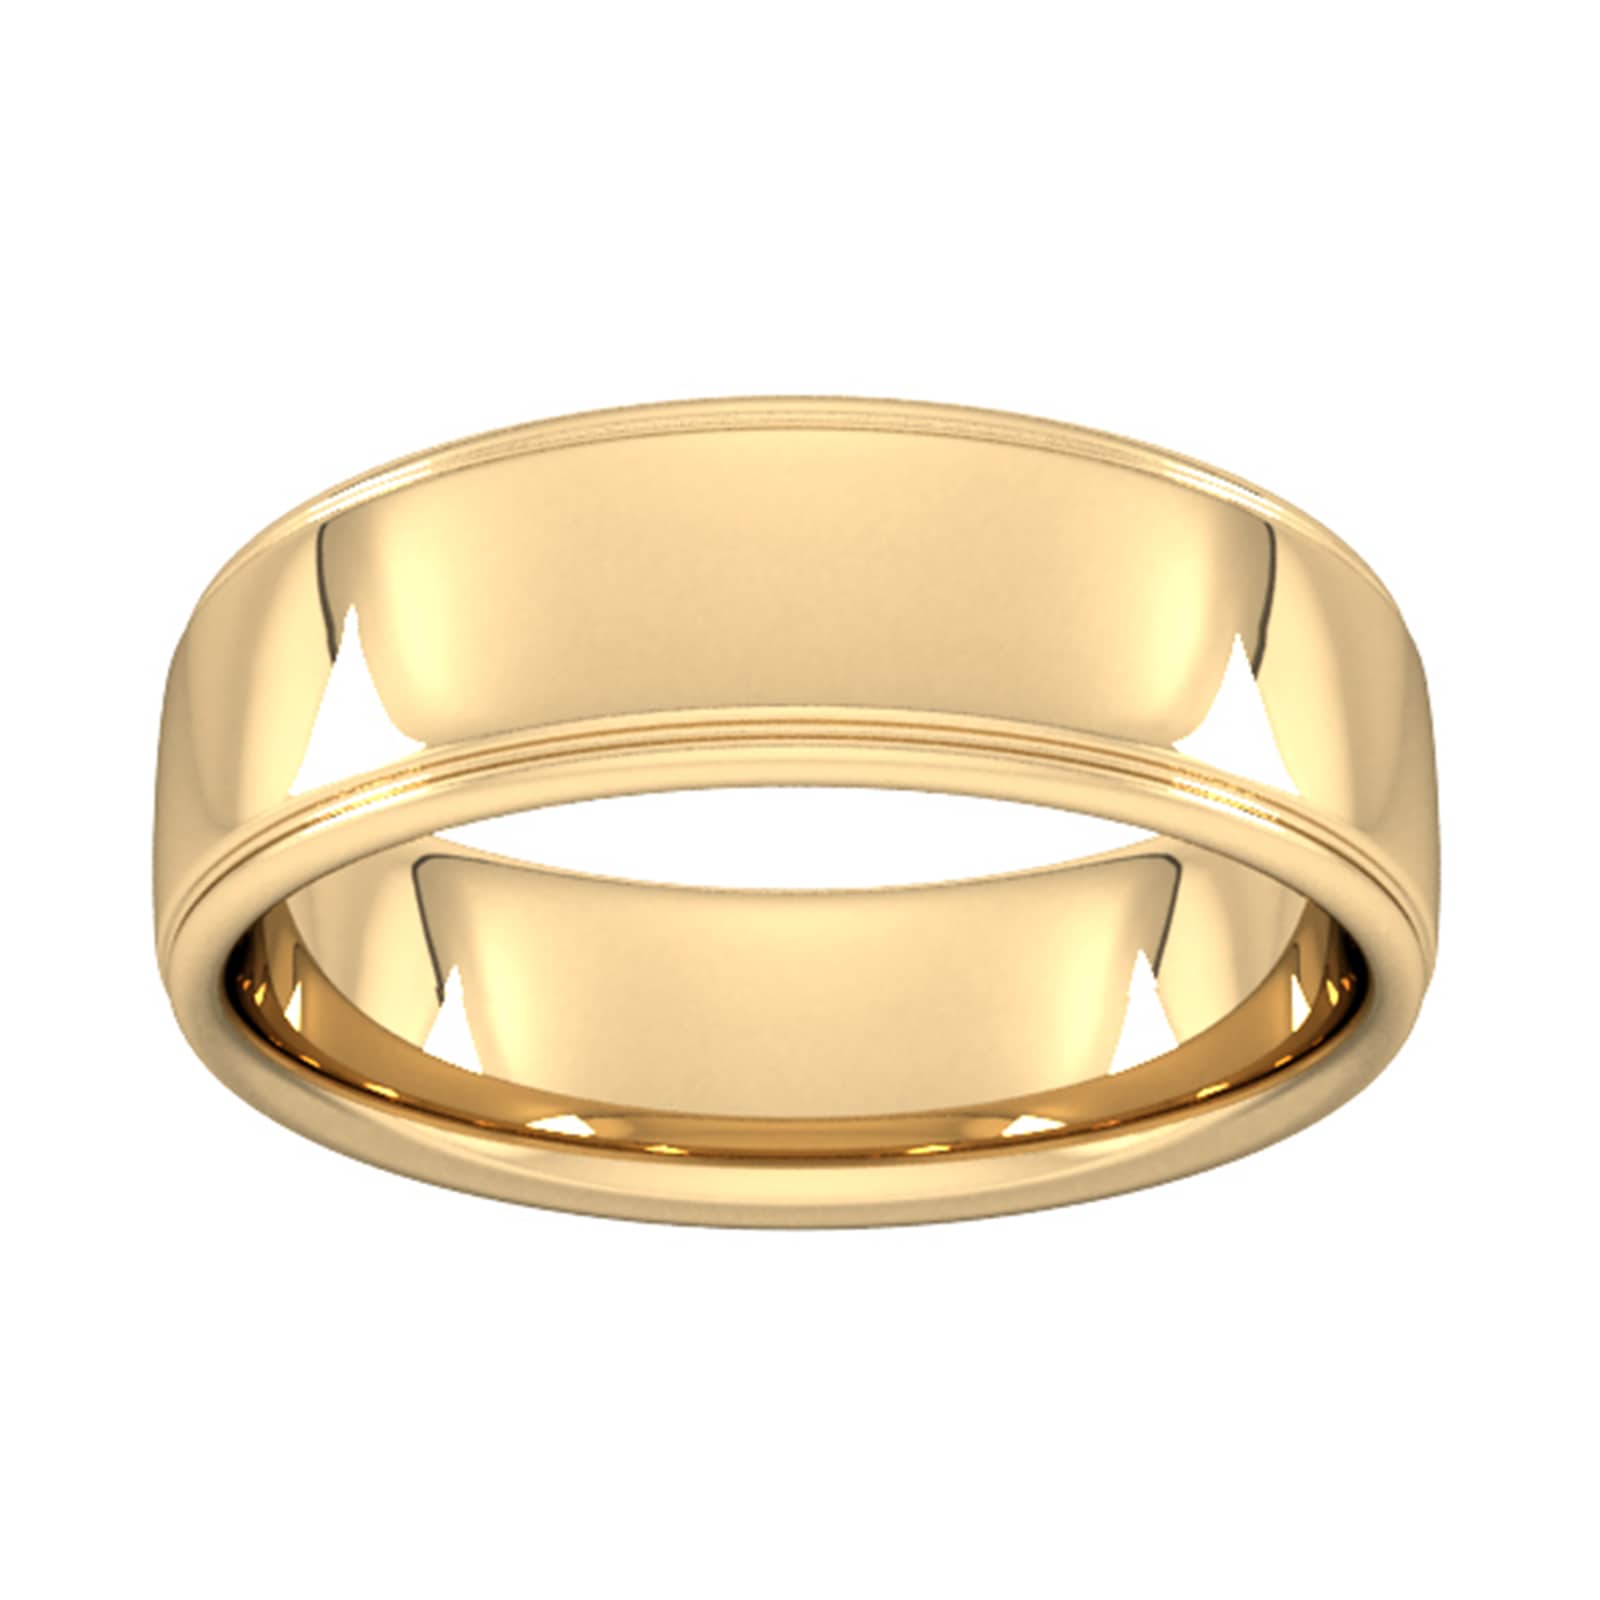 7mm Slight Court Standard Polished Finish With Grooves Wedding Ring In 9 Carat Yellow Gold - Ring Size G